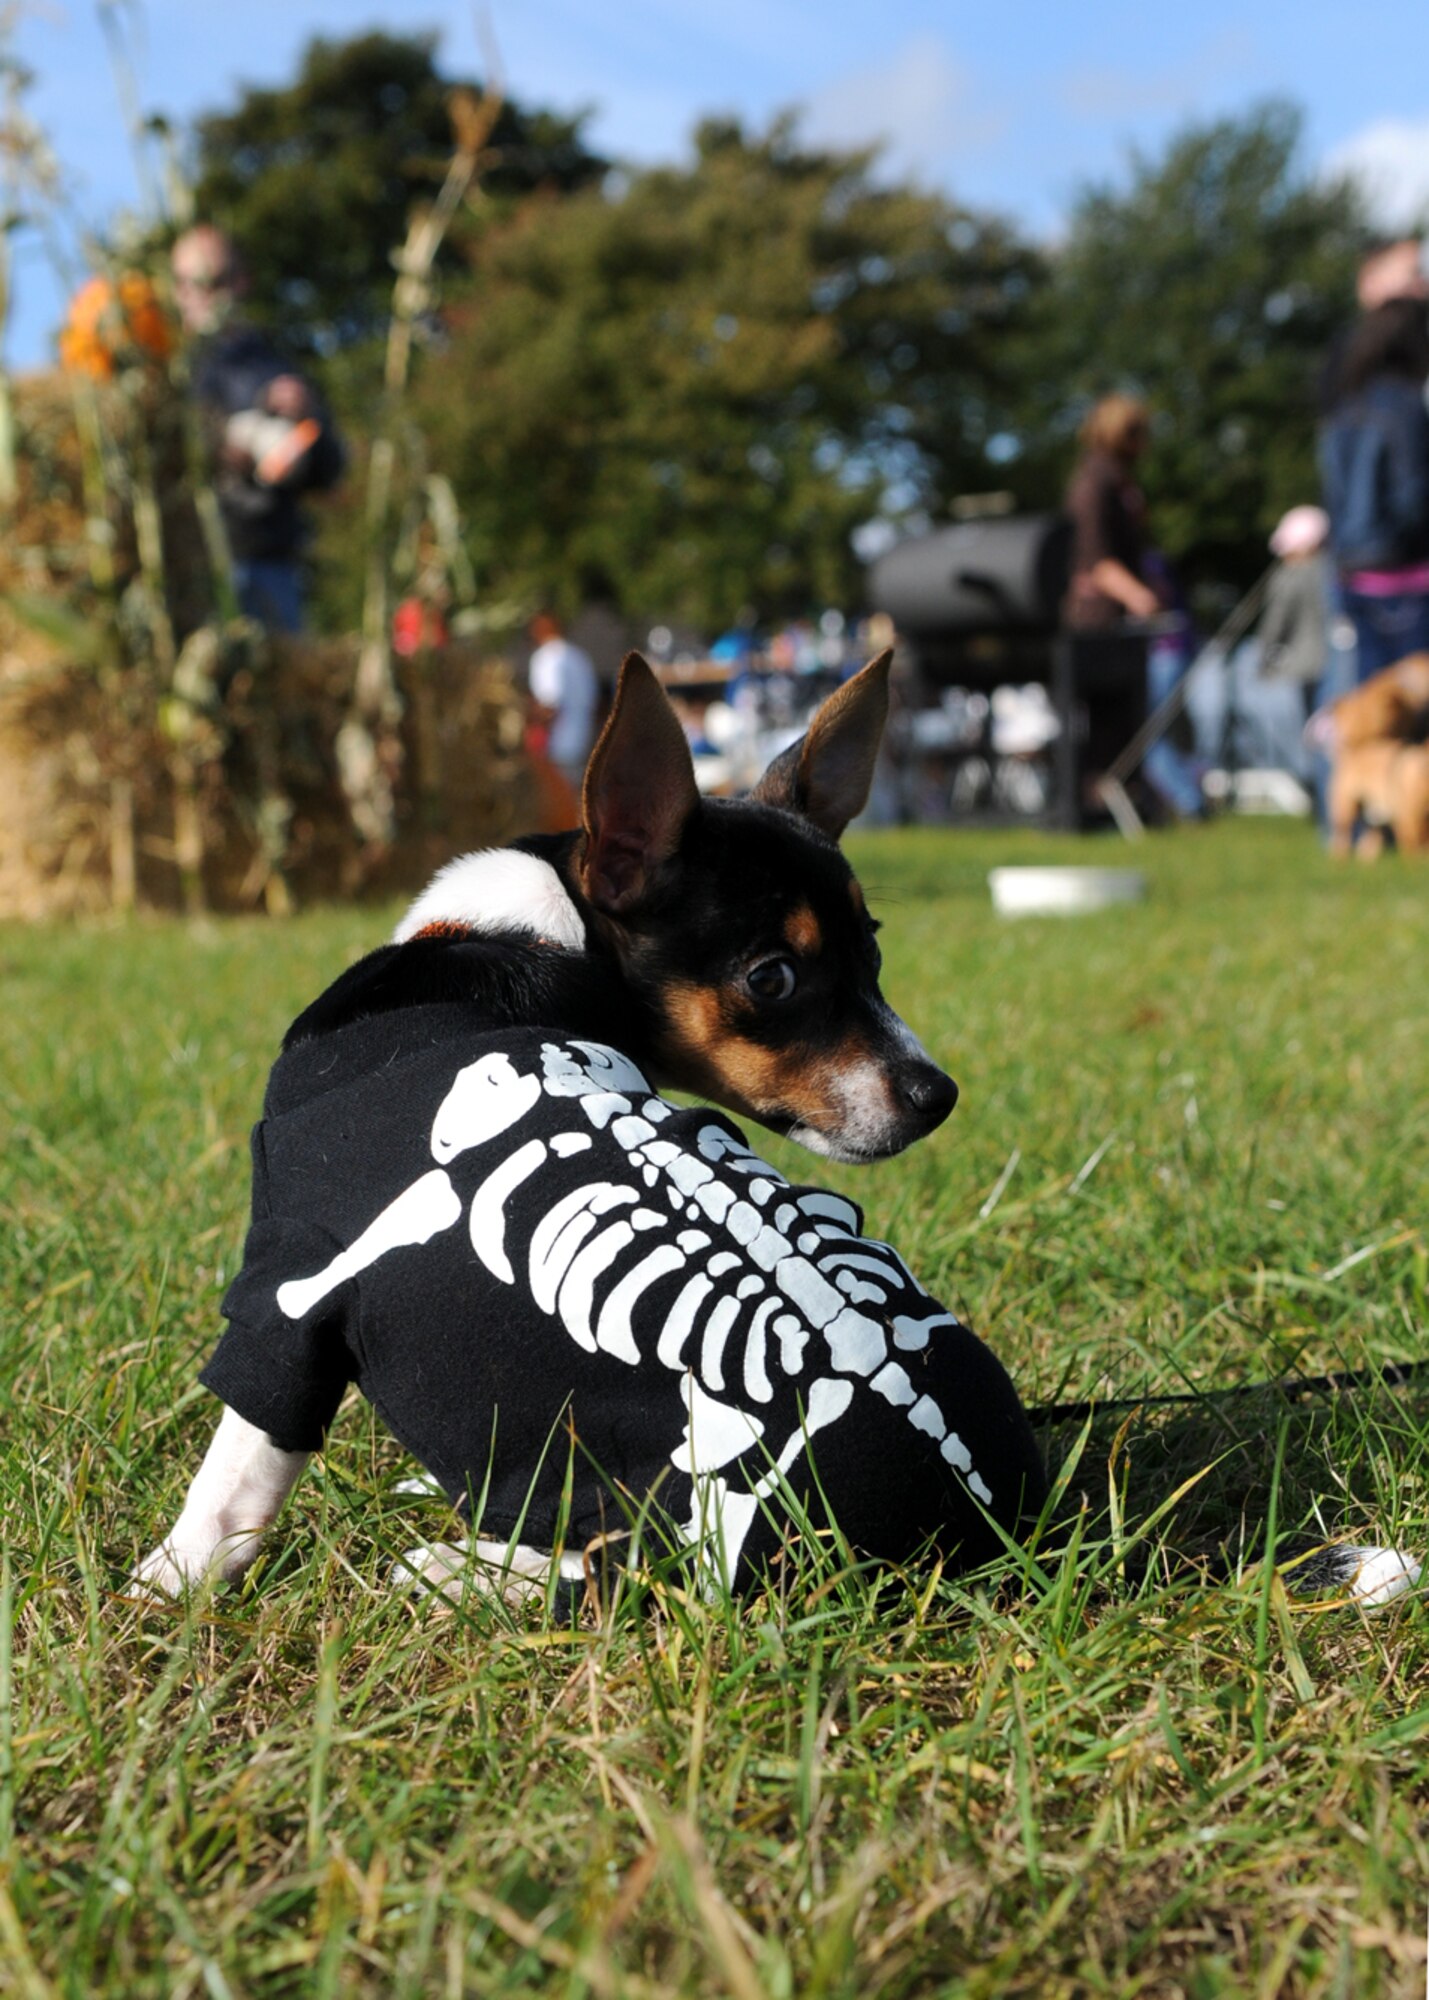 RAF FELTWELL, England -- Daphne, a baby Rat Terrier, shows off her skeleton costume at the RAF Feltwell Vet Clinic's 2nd Annual Petfest Oct. 12.  The event, which raised money for a local animal shelter, featured contests for pet costumes, tricks and pet/owner lookalike, a dog treat bake sale and military working dog demonstration.  (U.S. Air Force photo/Staff Sgt. Austin M. May)